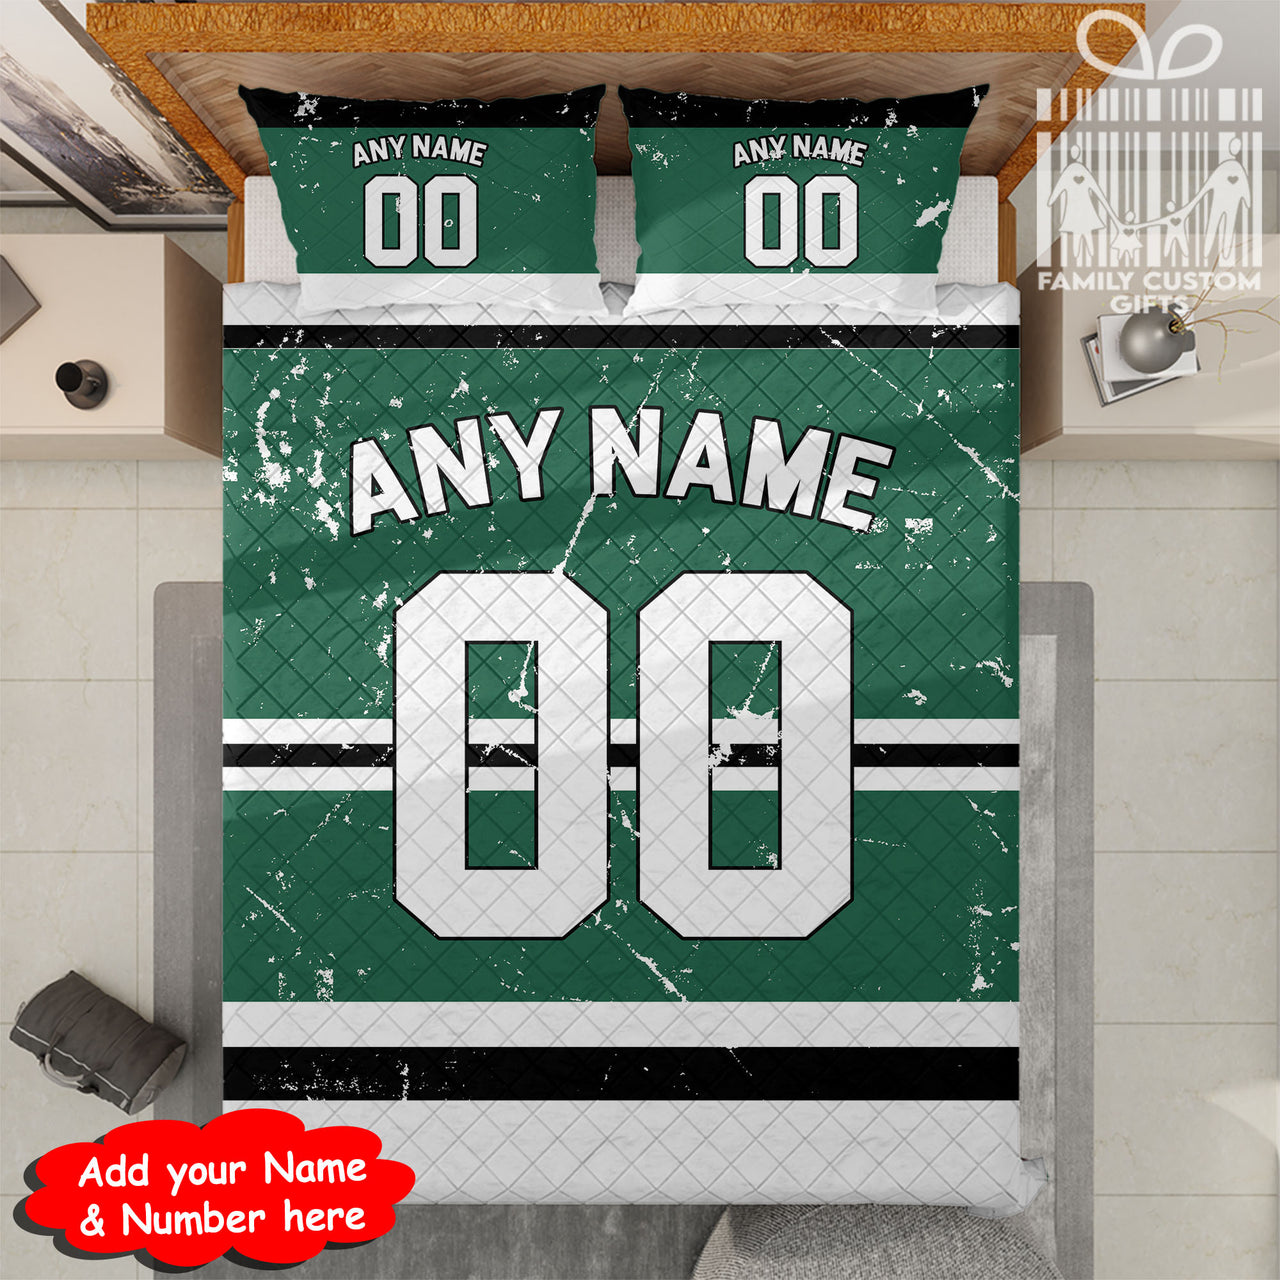 Custom Quilt Sets Dallas Jersey Personalized Ice hockey Premium Quilt Bedding for Men Women